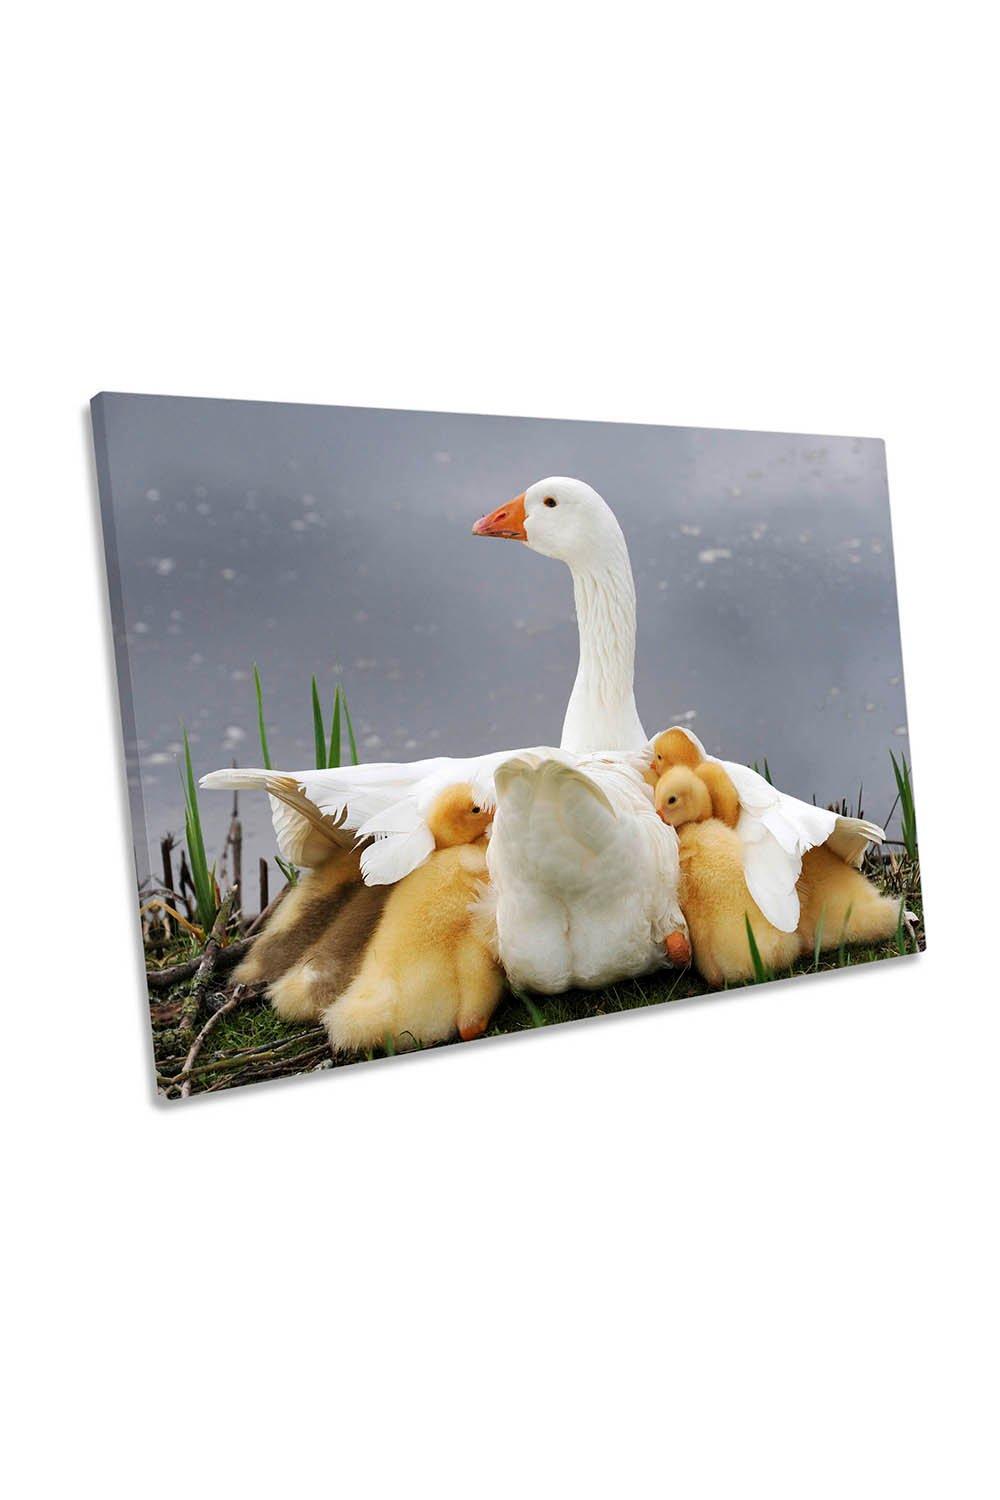 Mum's Protection Duck Ducklings Cute Canvas Wall Art Picture Print